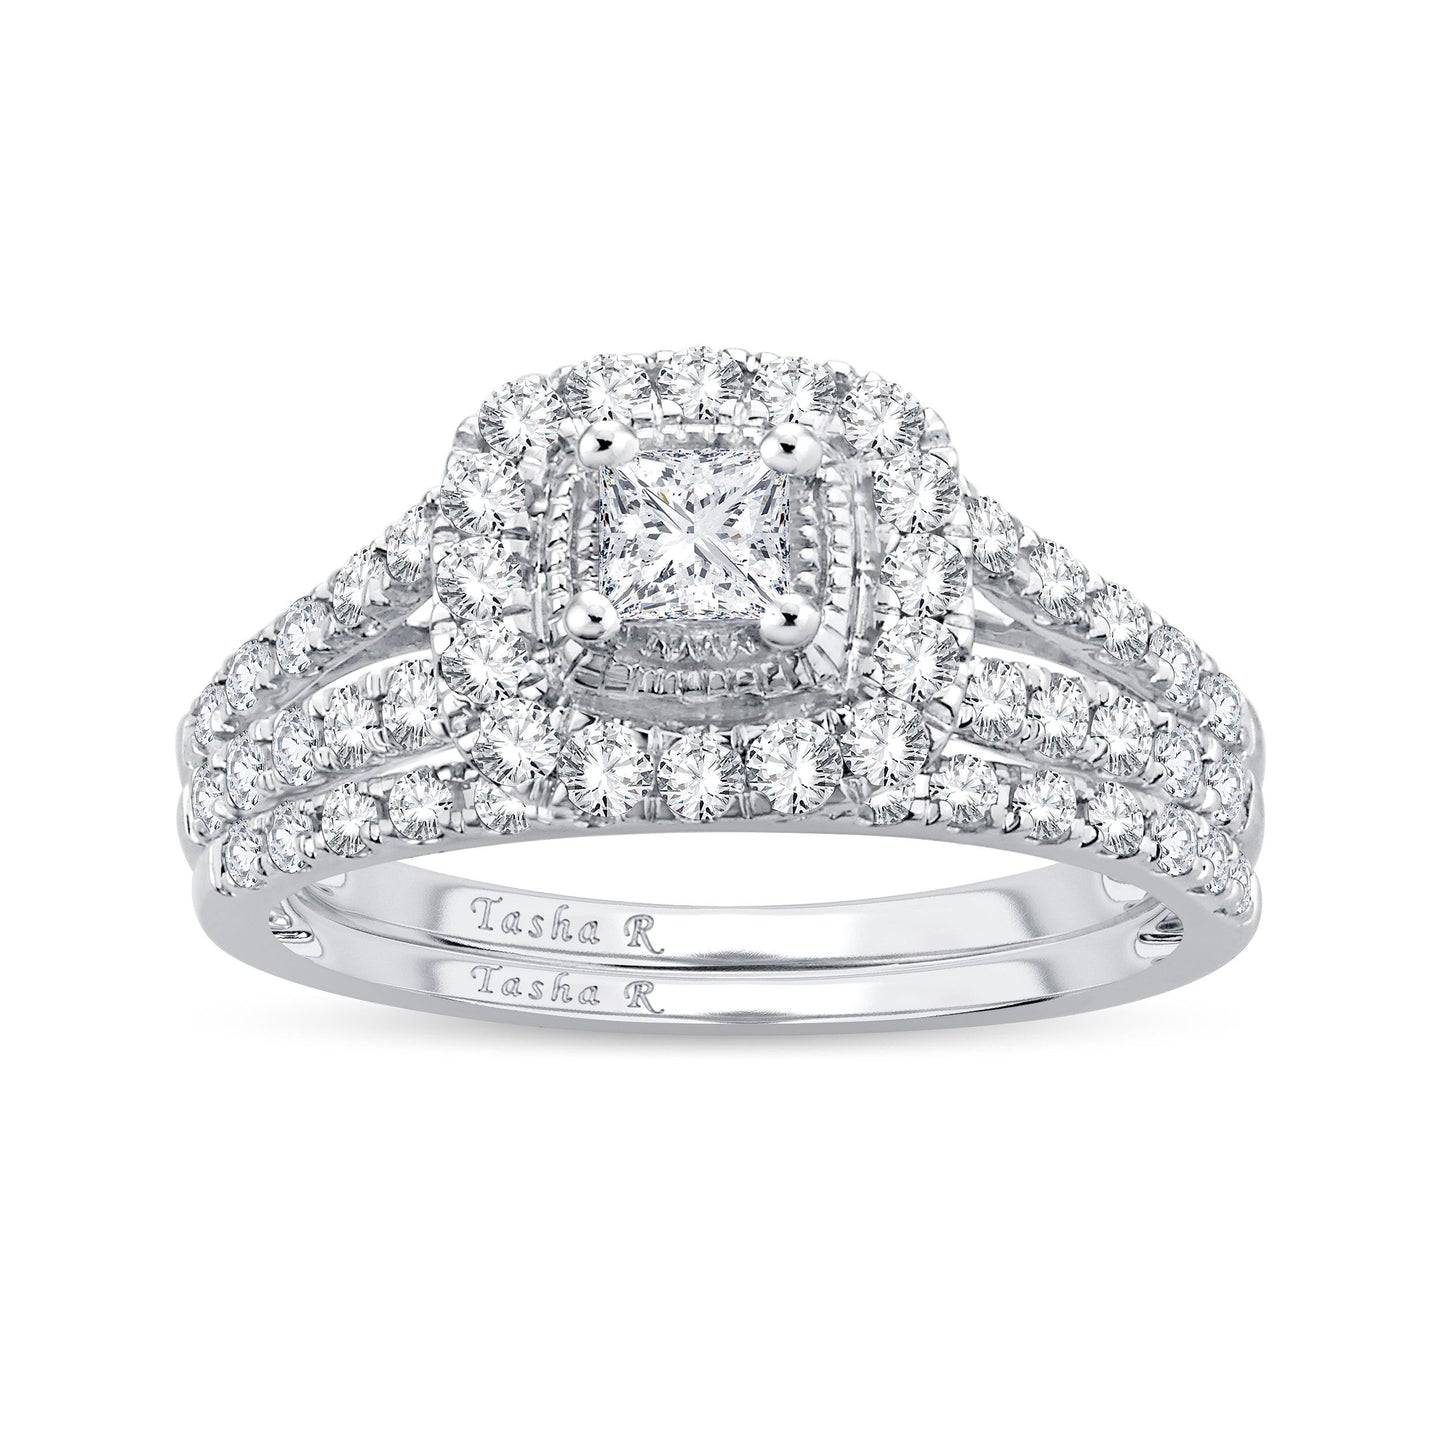 Cushion Cut Diamond Engagement Ring with Halo - 1.00 Carat in 14KT White Gold